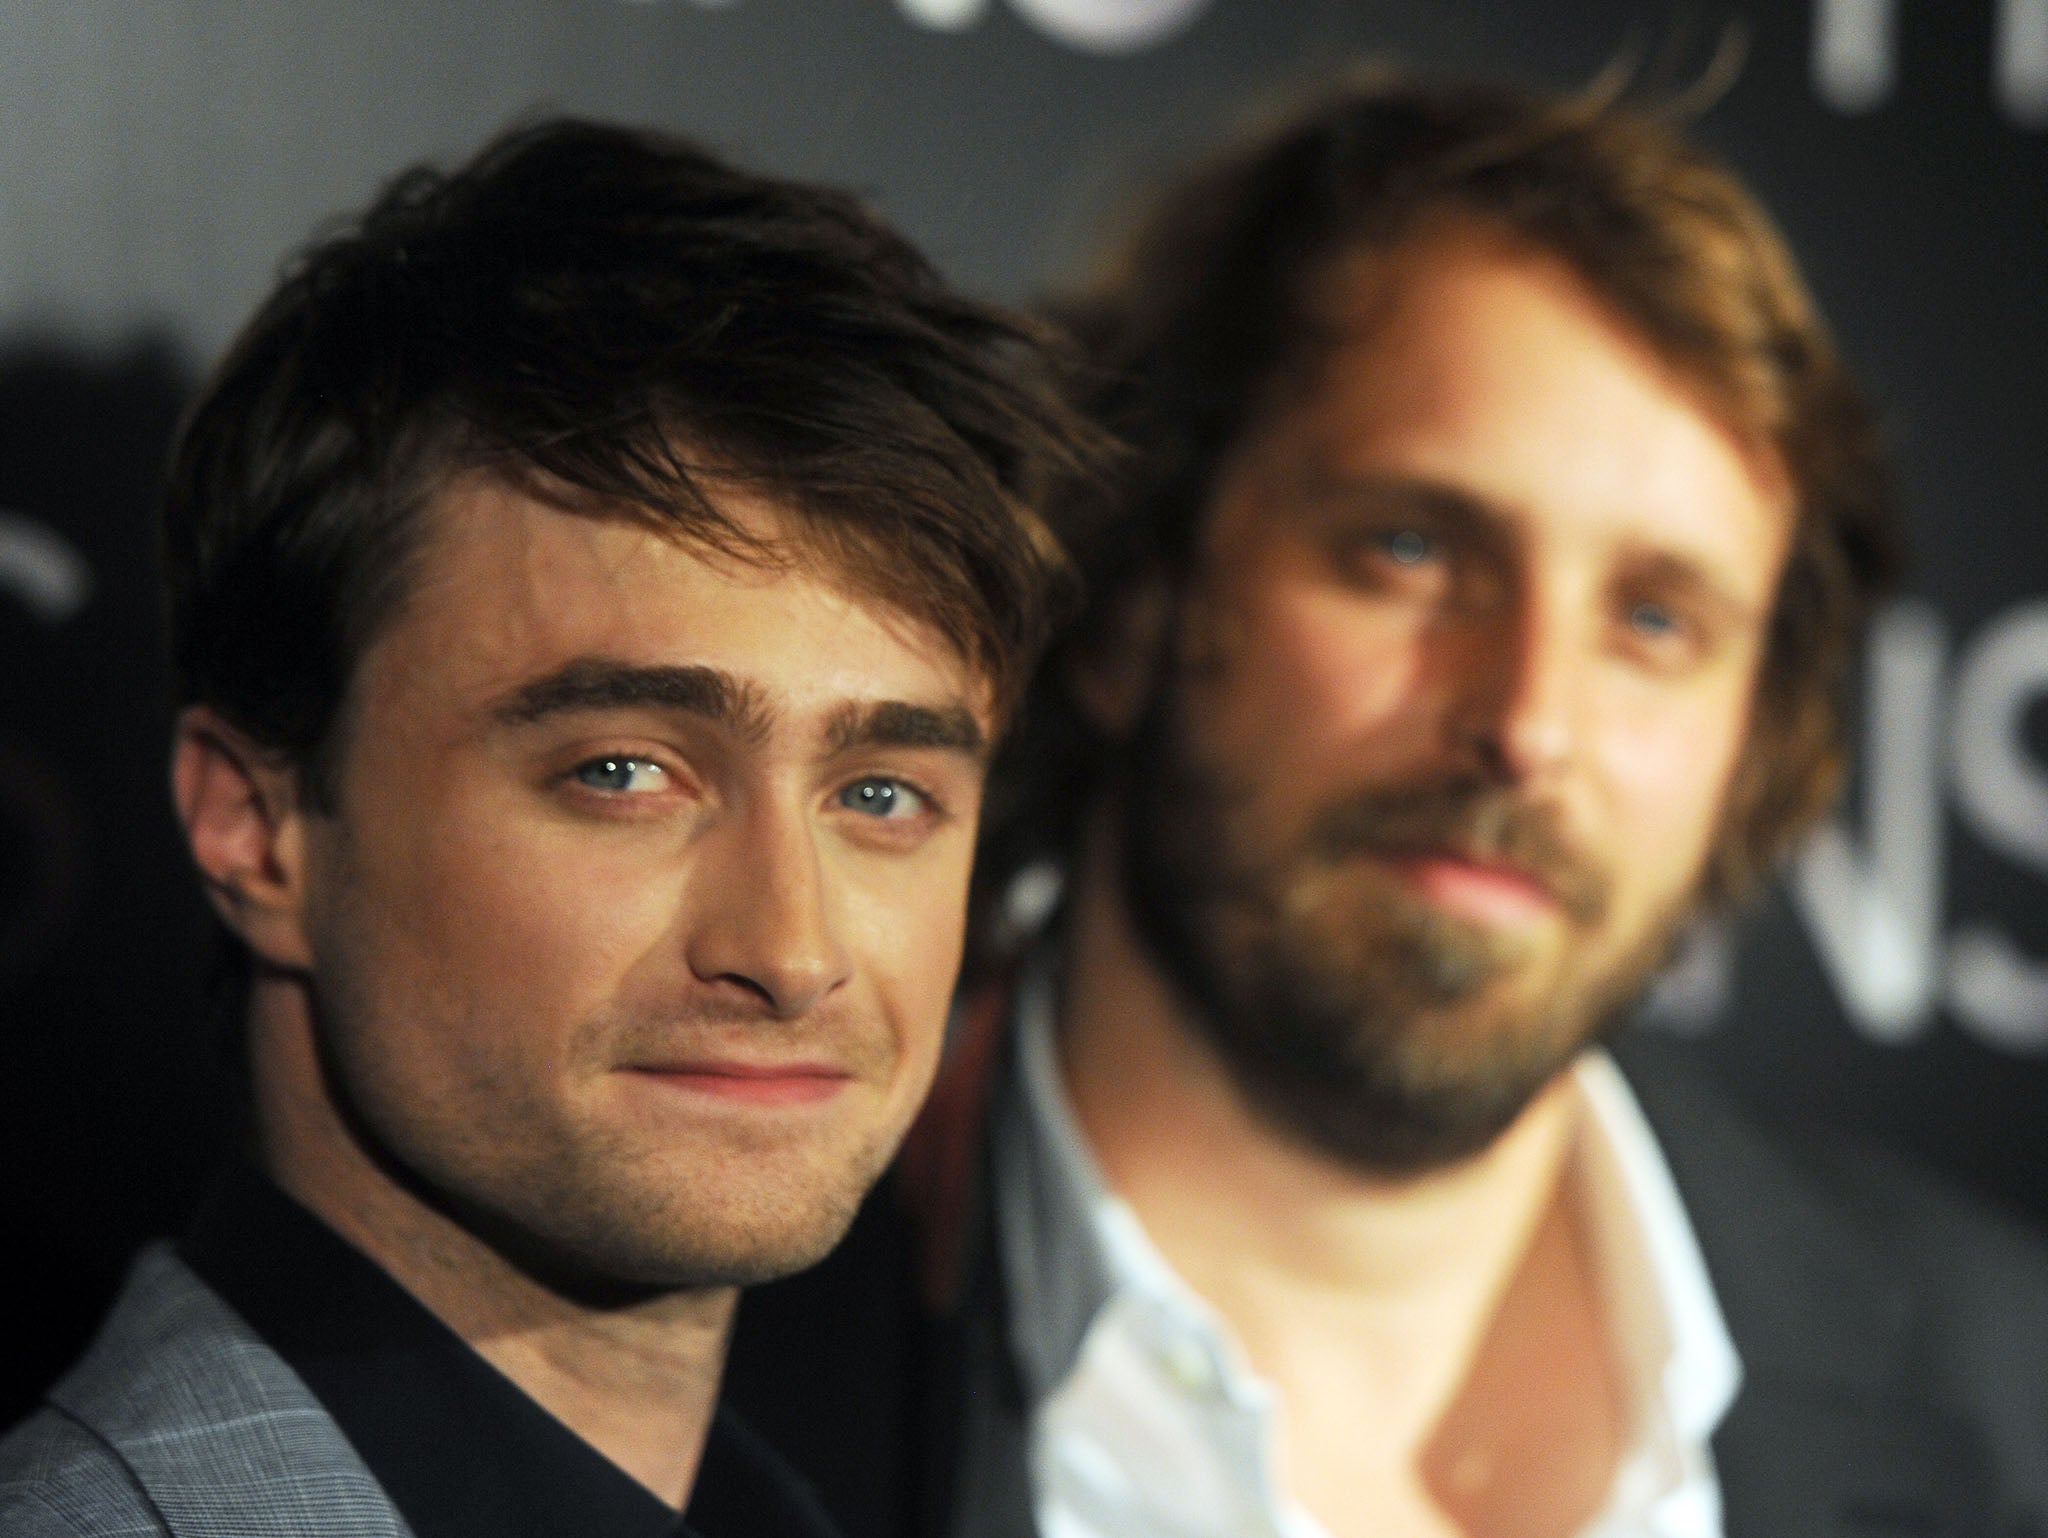 Daniel Radcliffe (L) and French director Alexandre Aja pose as they arrive for the premiere of their film Horns on 16 September